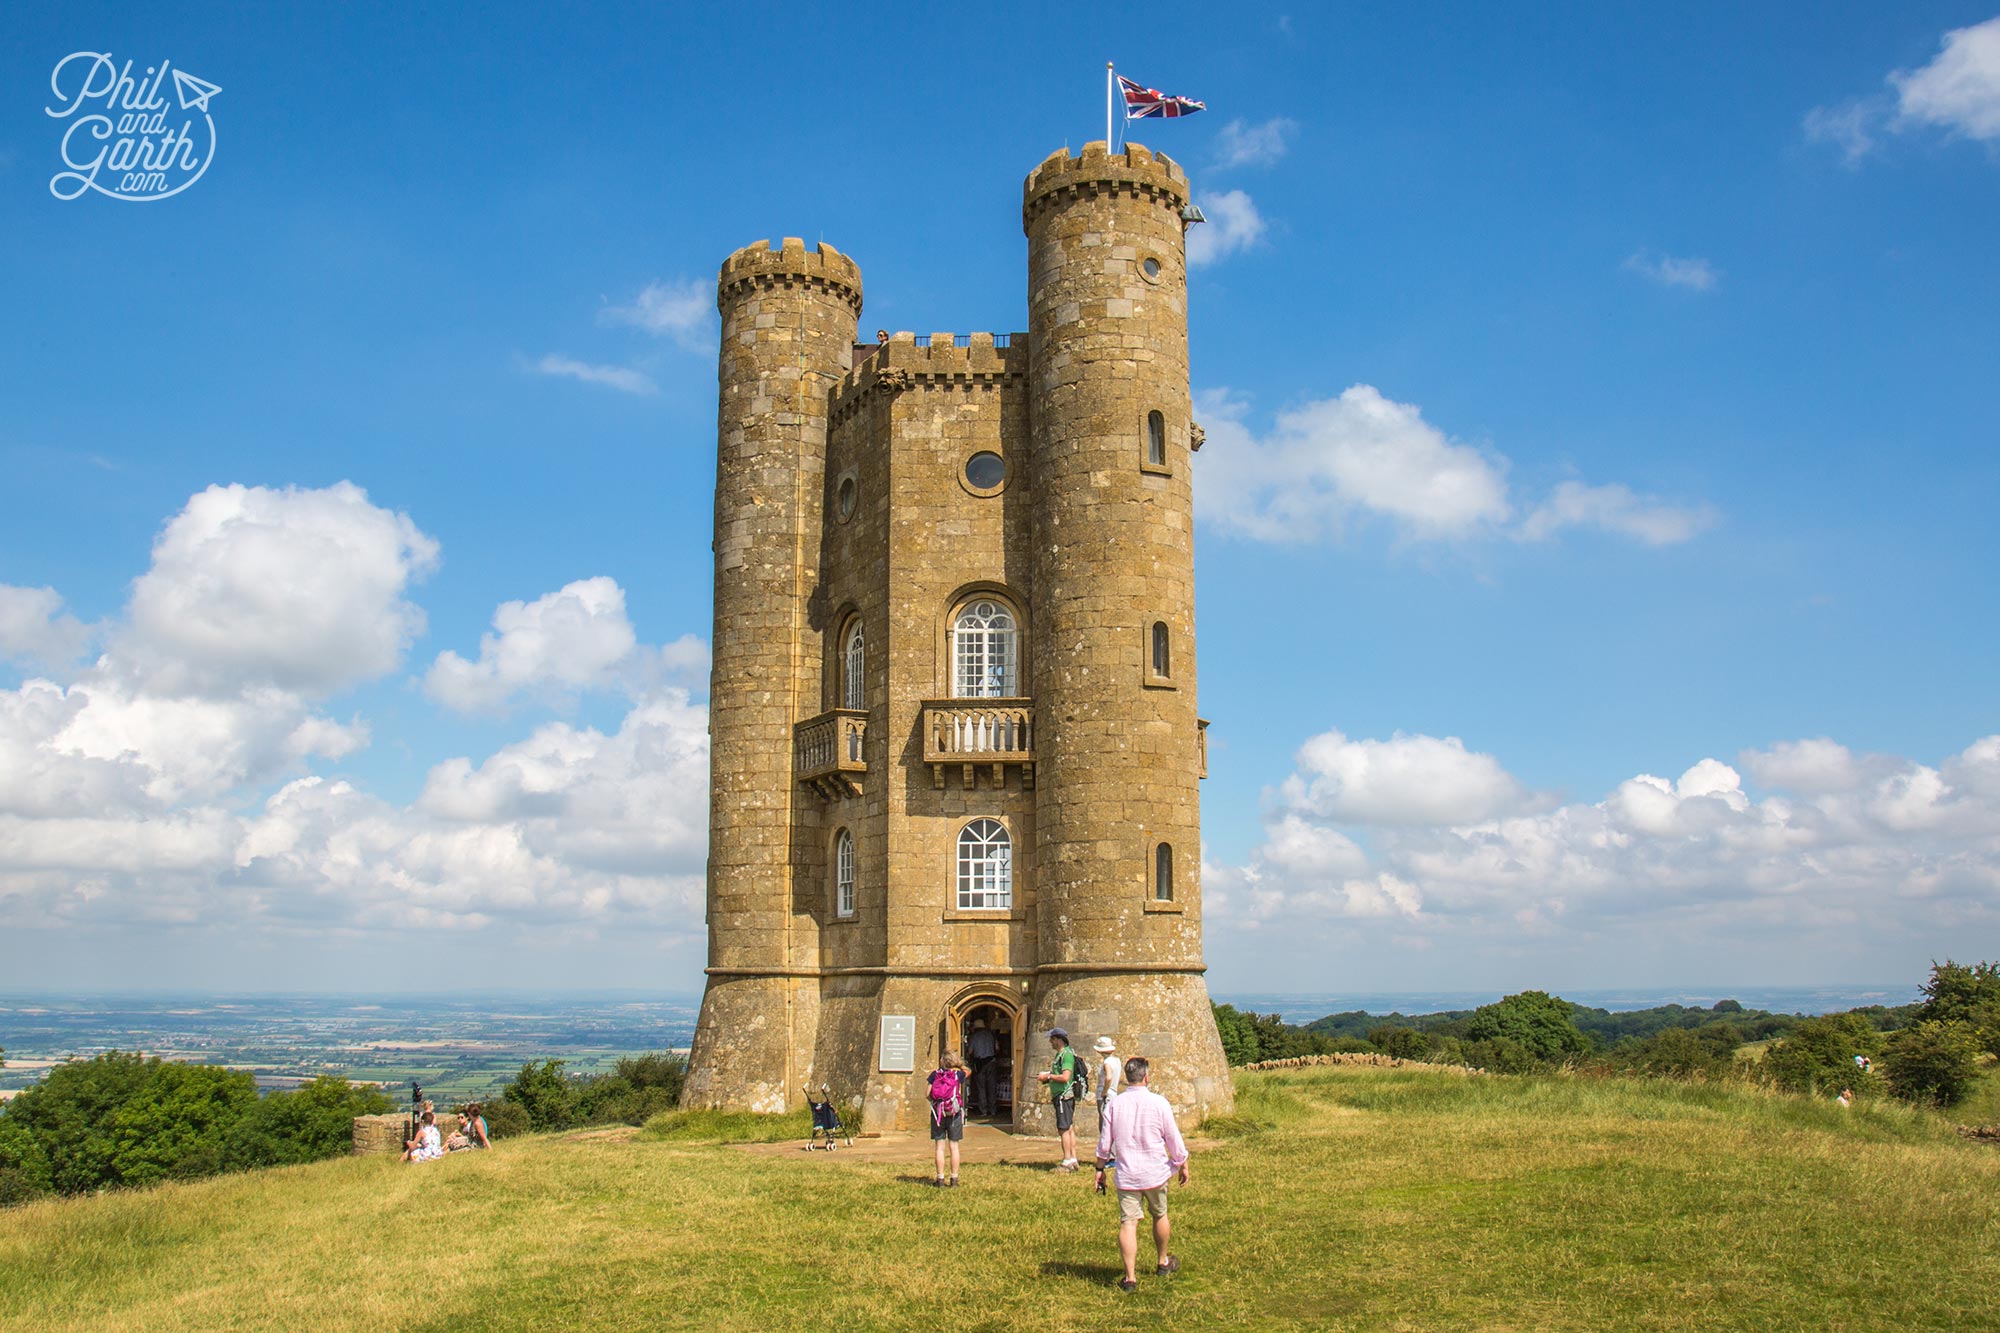 Broadway Tower - the highest castle in the Cotswolds